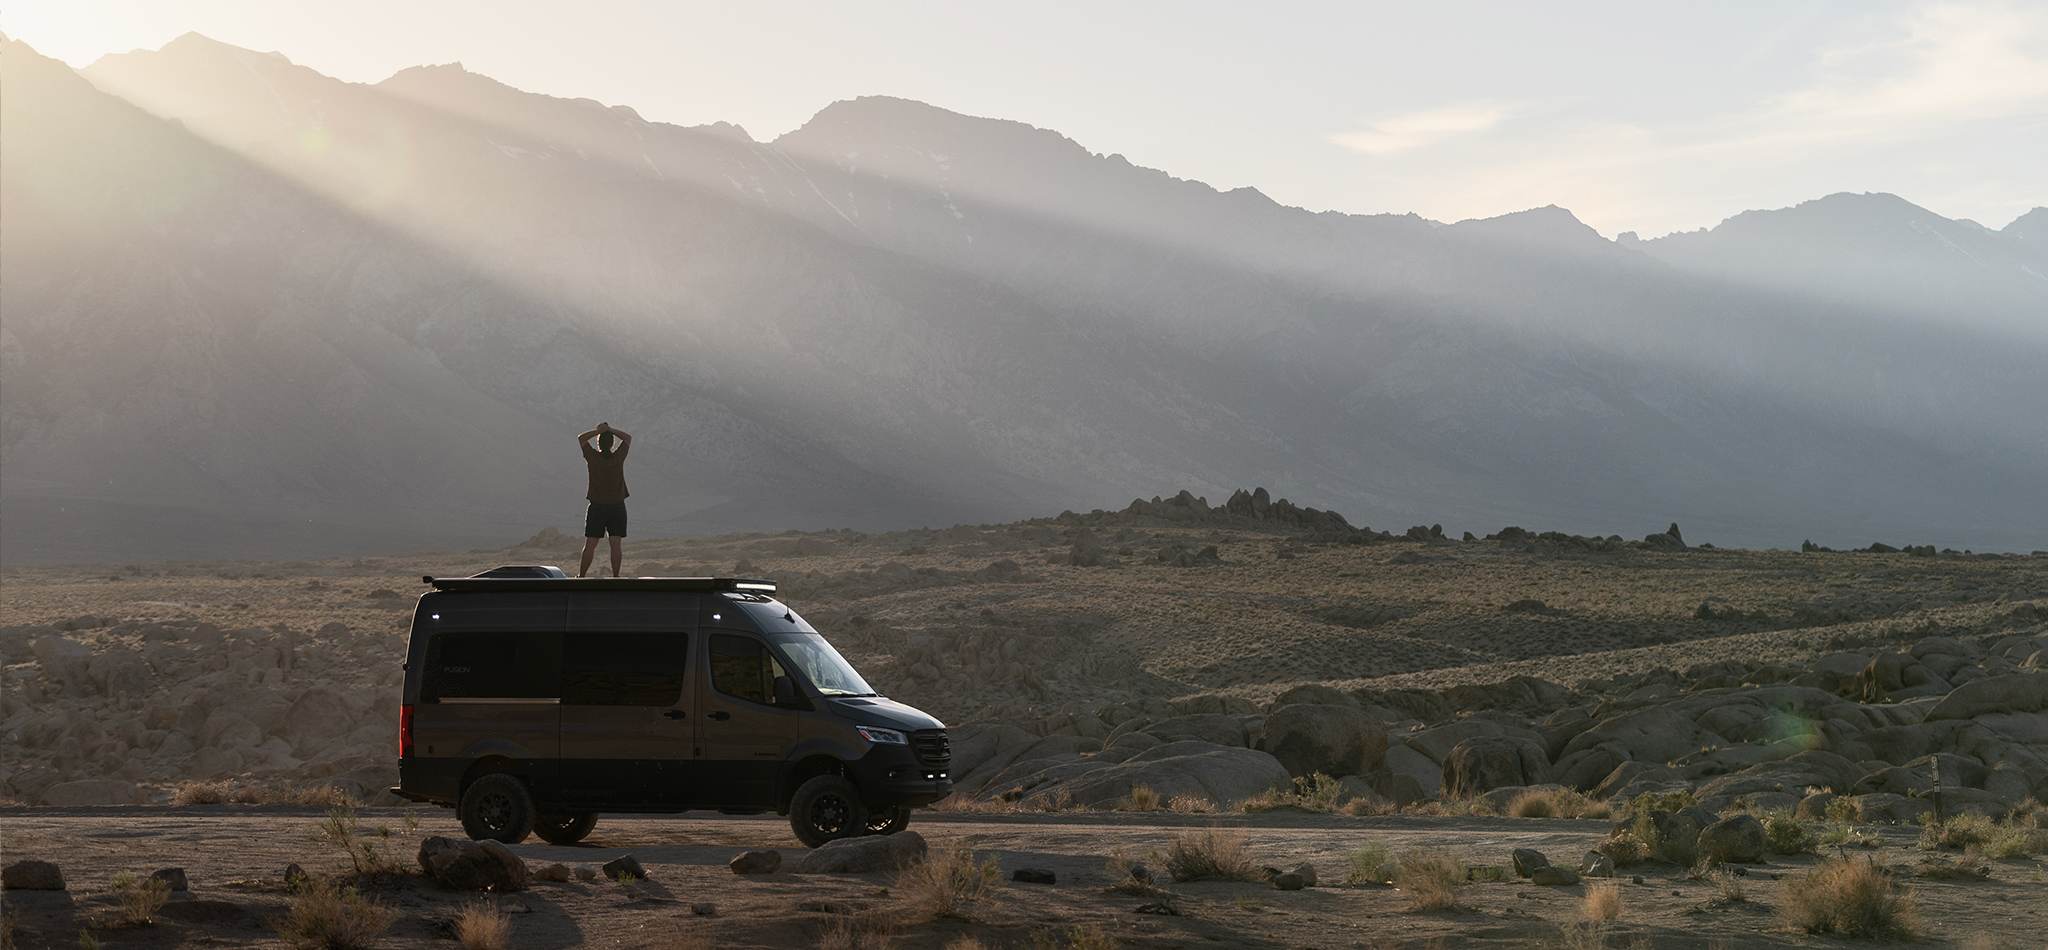 A person stands on top of their custom Sprinter van looking at the sunlight breaking over mountain tops in the distance.